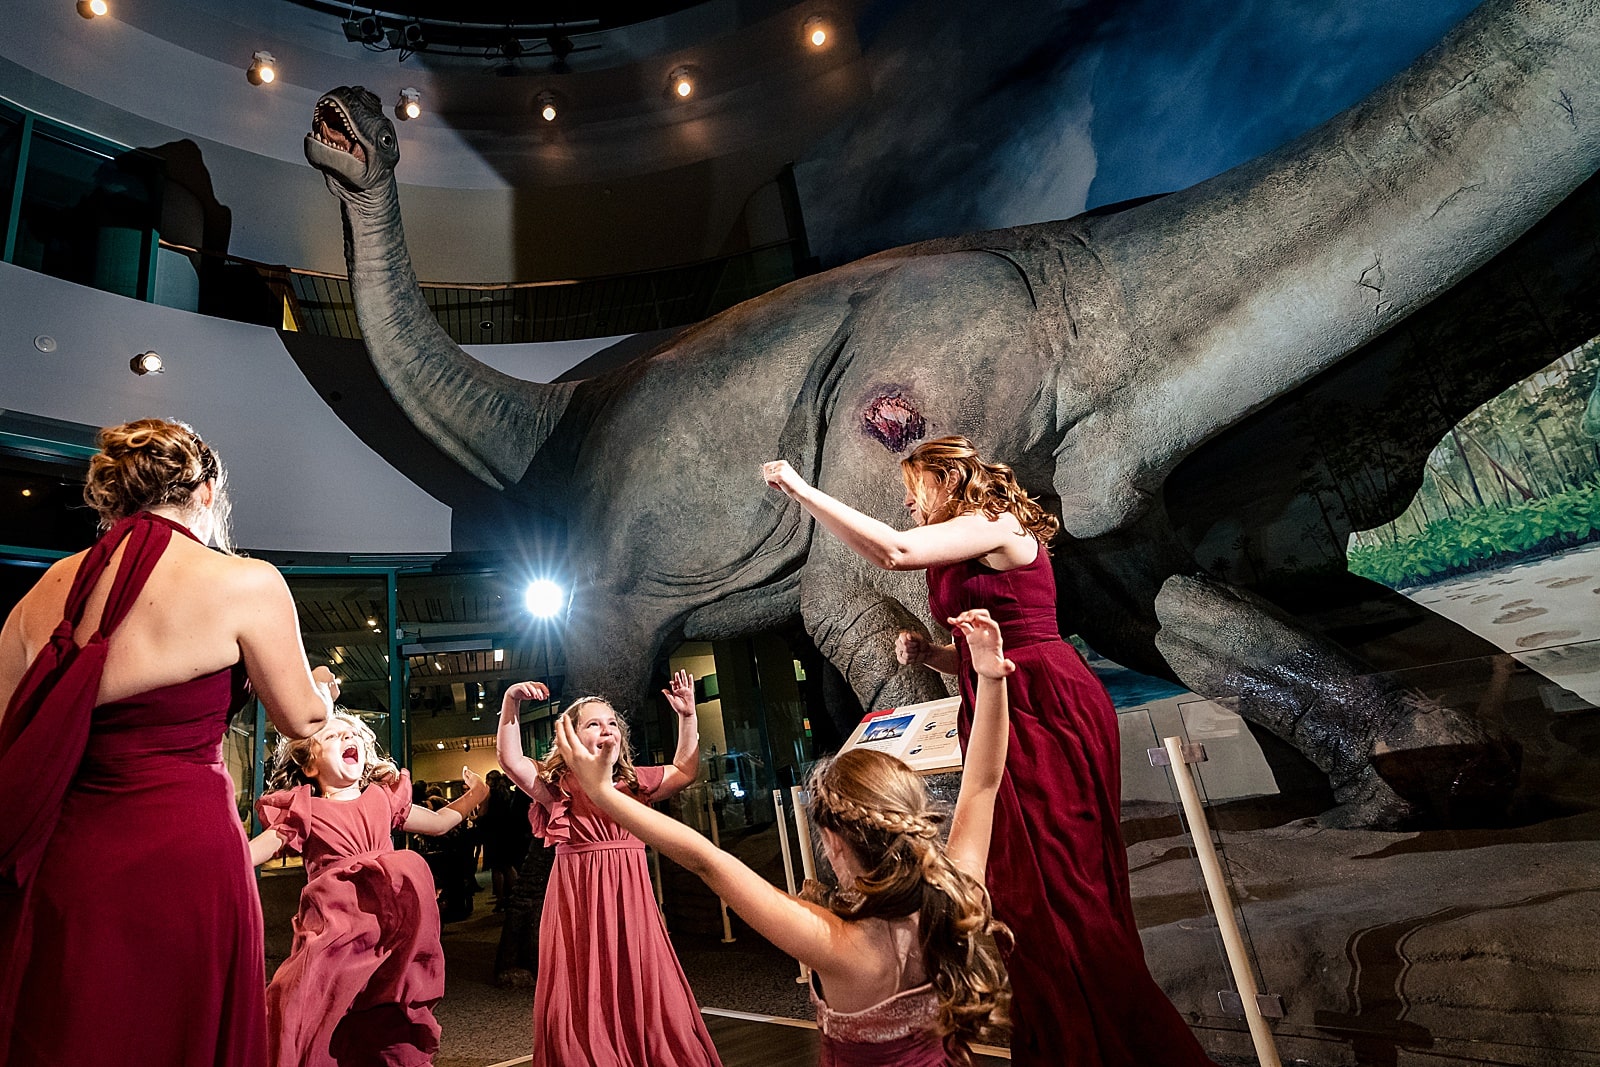 Science Museum wedding reception means there are dinosaurs on the dance floor